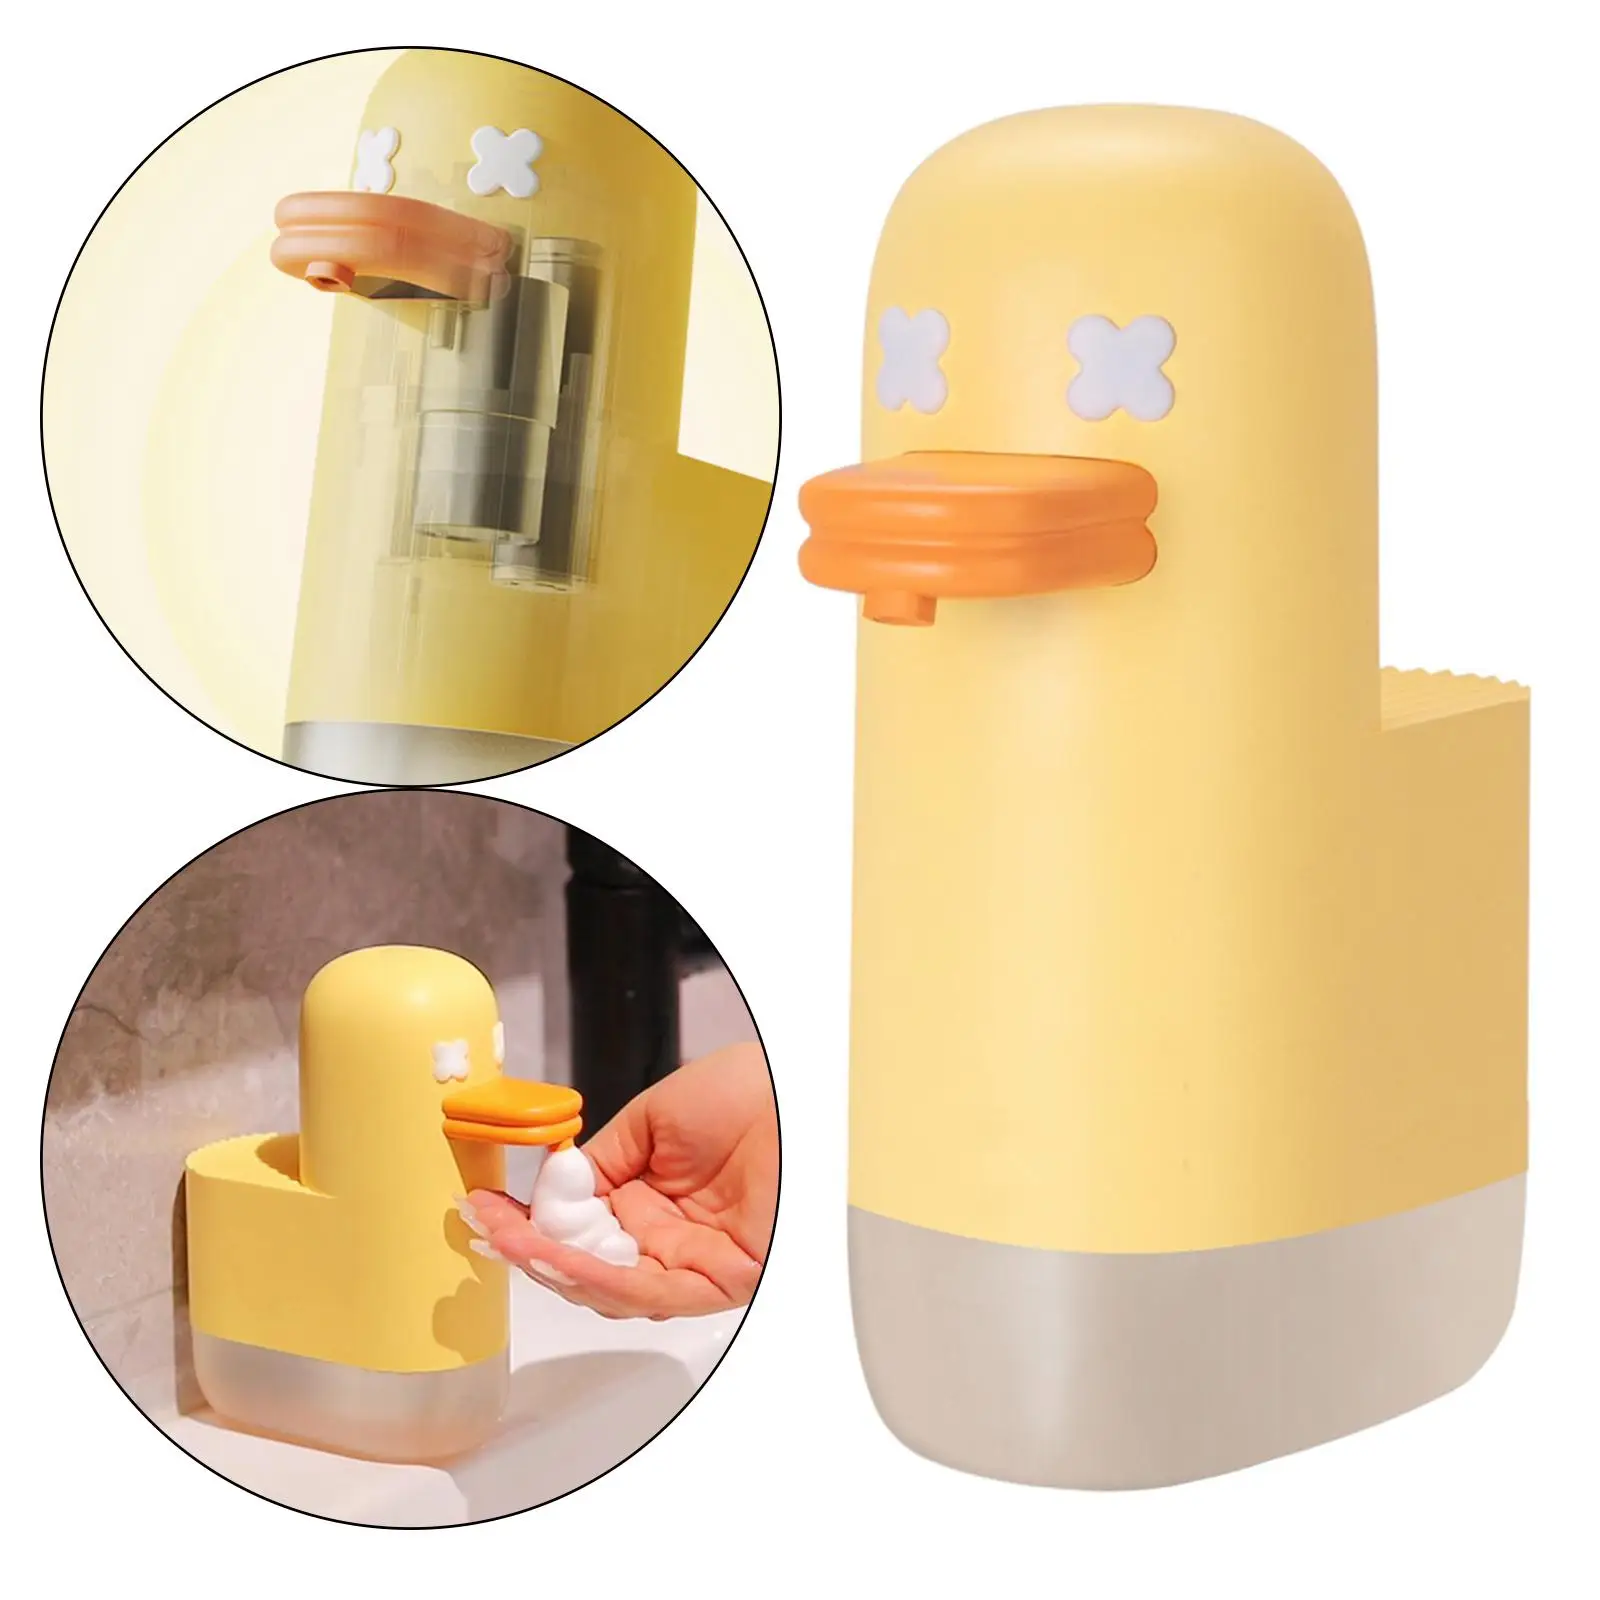 Electric Hands Dispenser Infrared Motion Sensor Rechargeable for Kids Widely Used Bathroom Office to Refill